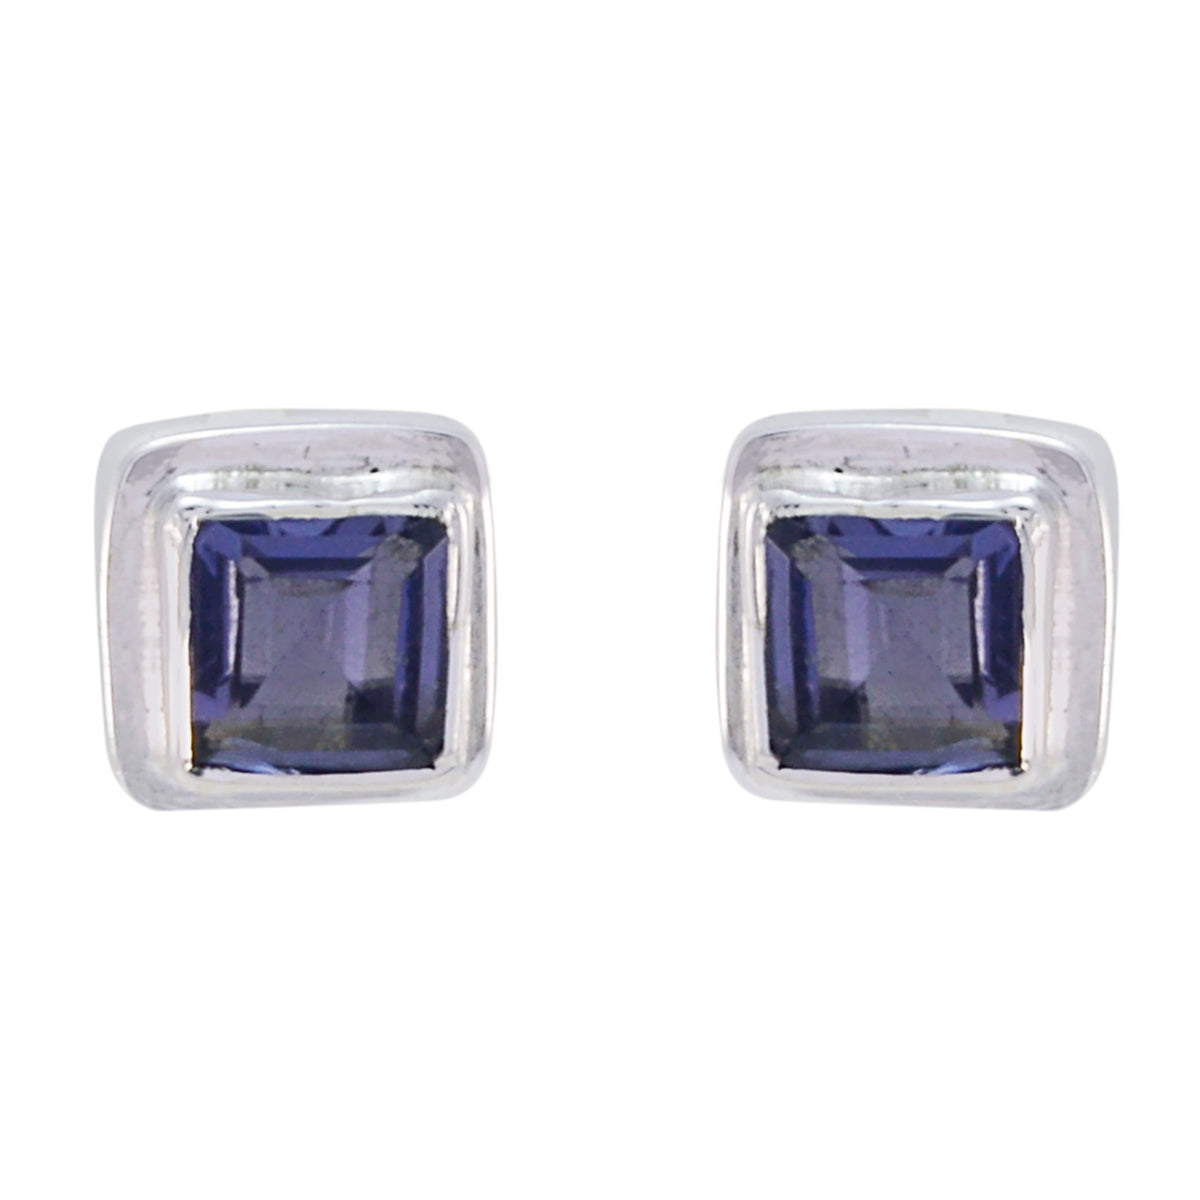 Riyo Nice Gemstone square Faceted Nevy Blue Iolite Silver Earrings gift for cyber Monday